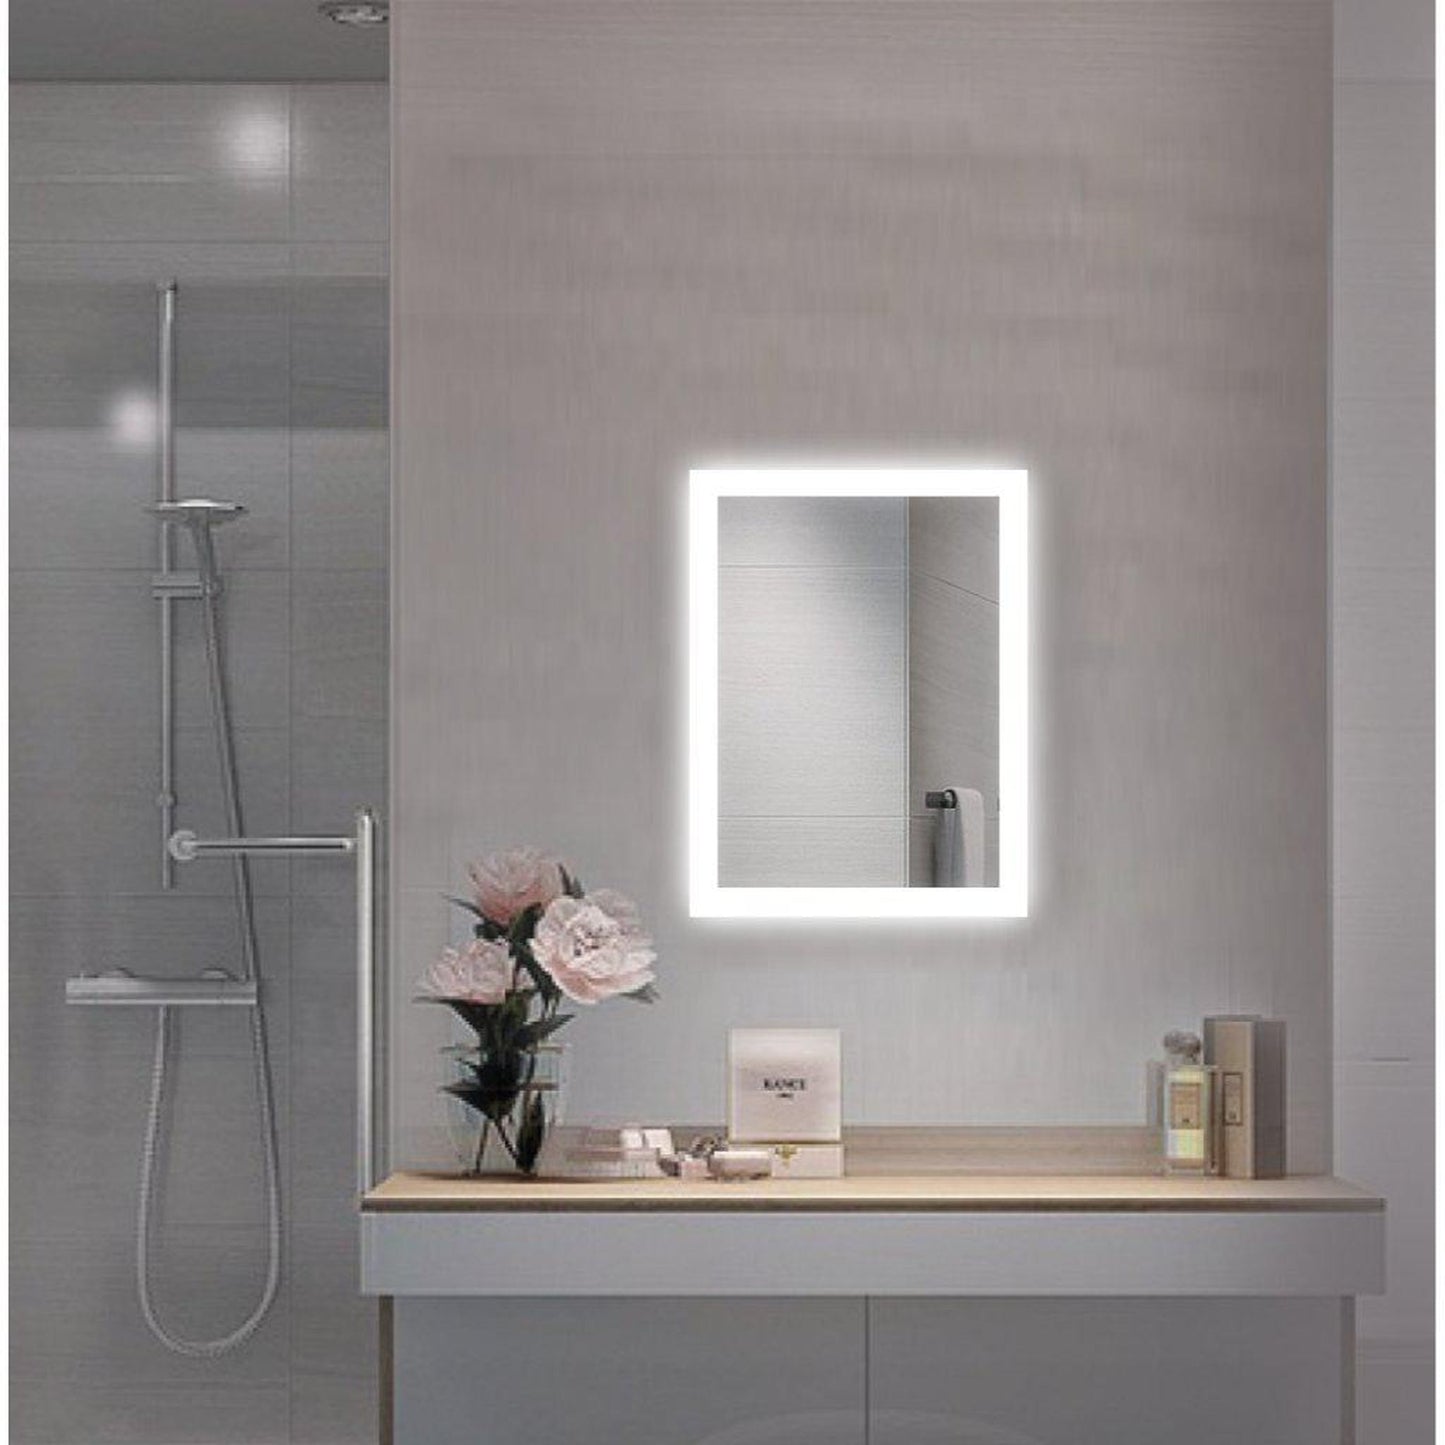 Krugg Reflections Bijou 15" x 20" Small Rectangular Wall-Mounted 5000K LED Mirror With Built-in Defogger and Dimmer